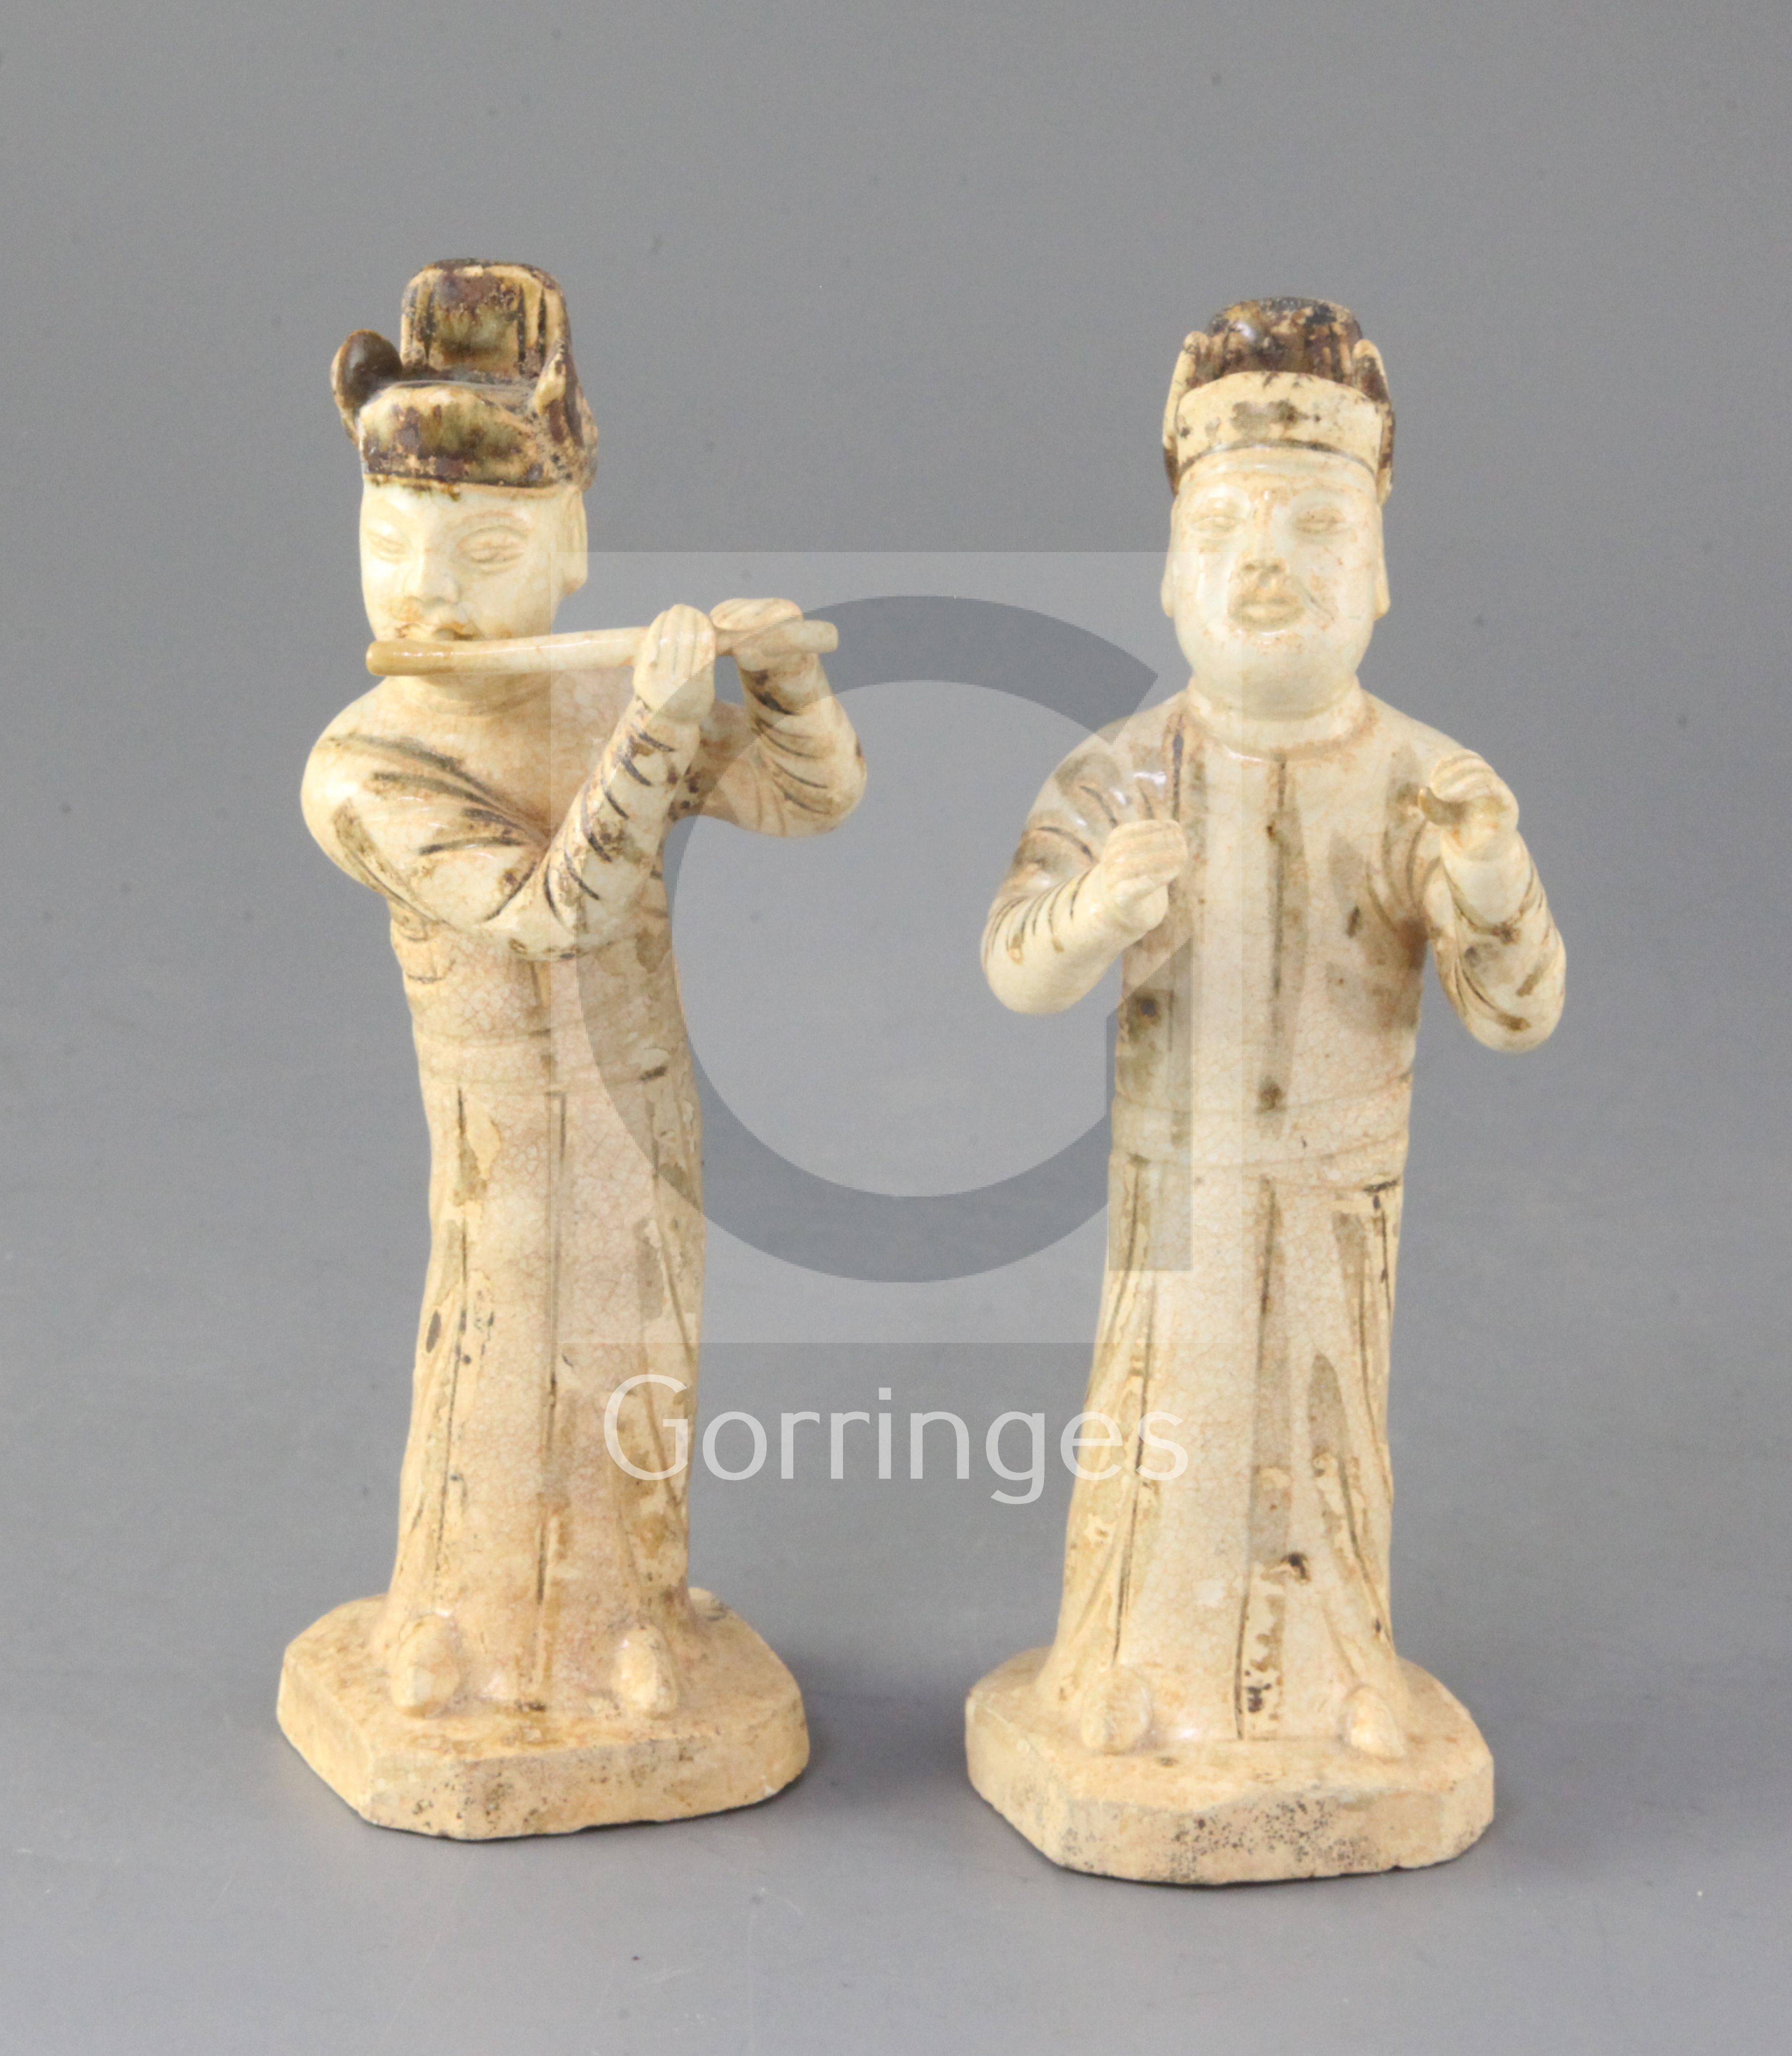 Two rare Chinese Qingbai standing figures of musicians, Song dynasty (11th/12th century), the